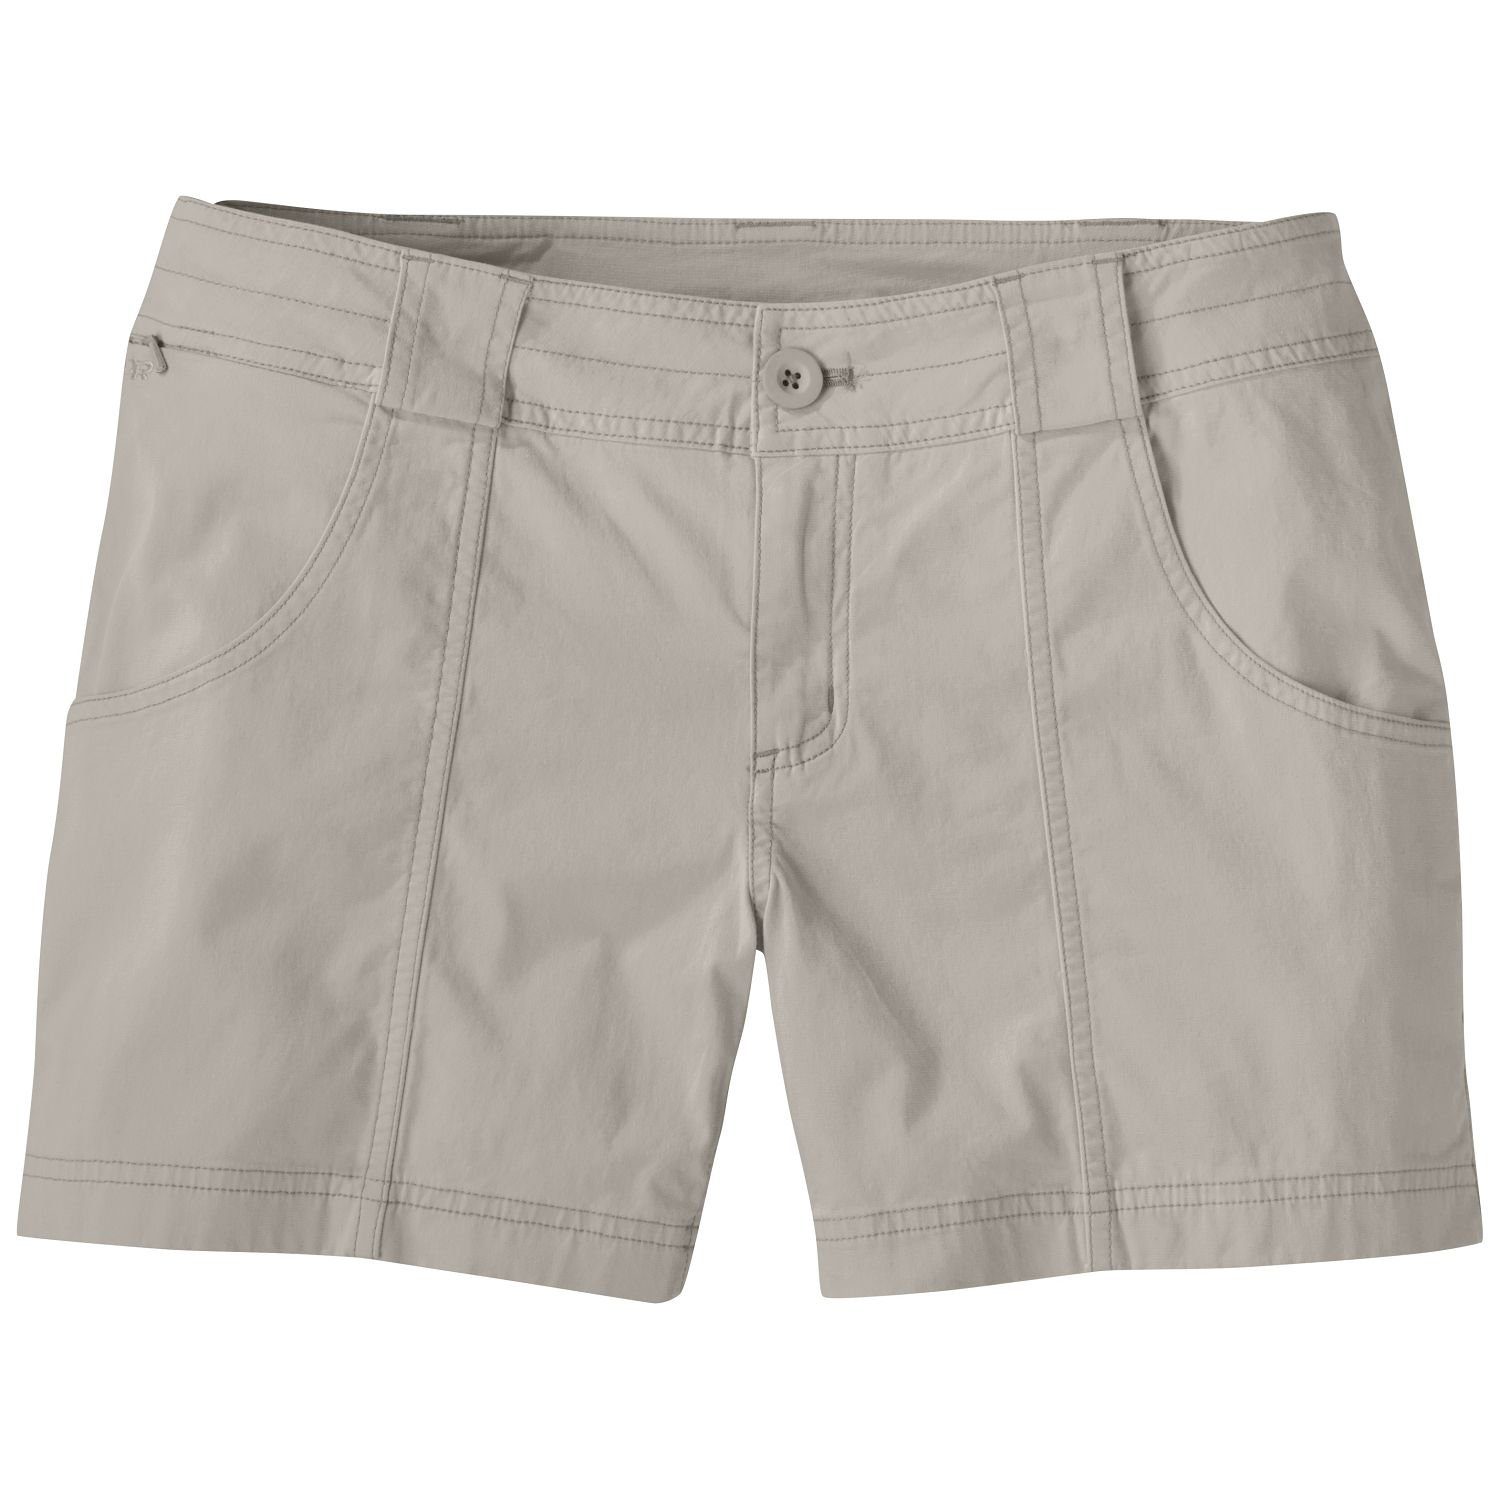 Outdoor Research Laufhose Outdoor Research Hose Women's Wadi Rum Shorts (1-tlg) weiß